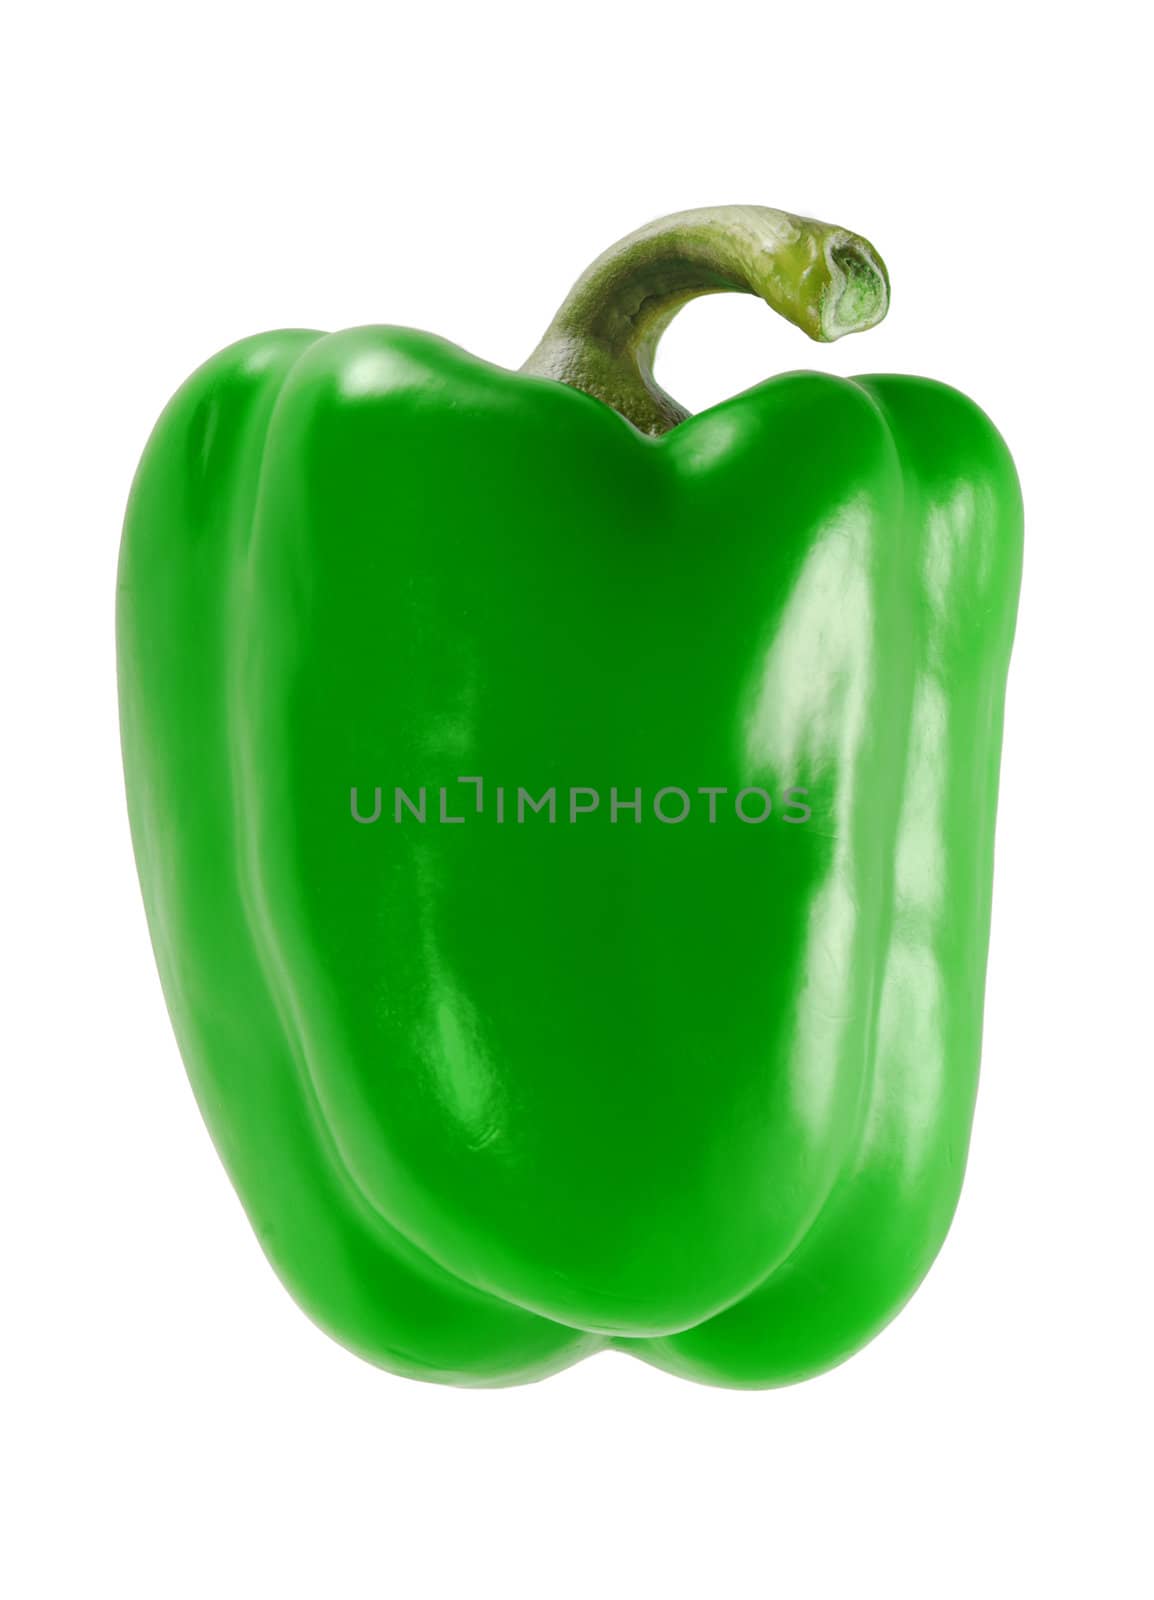 Green sweet pepper isolated on white background